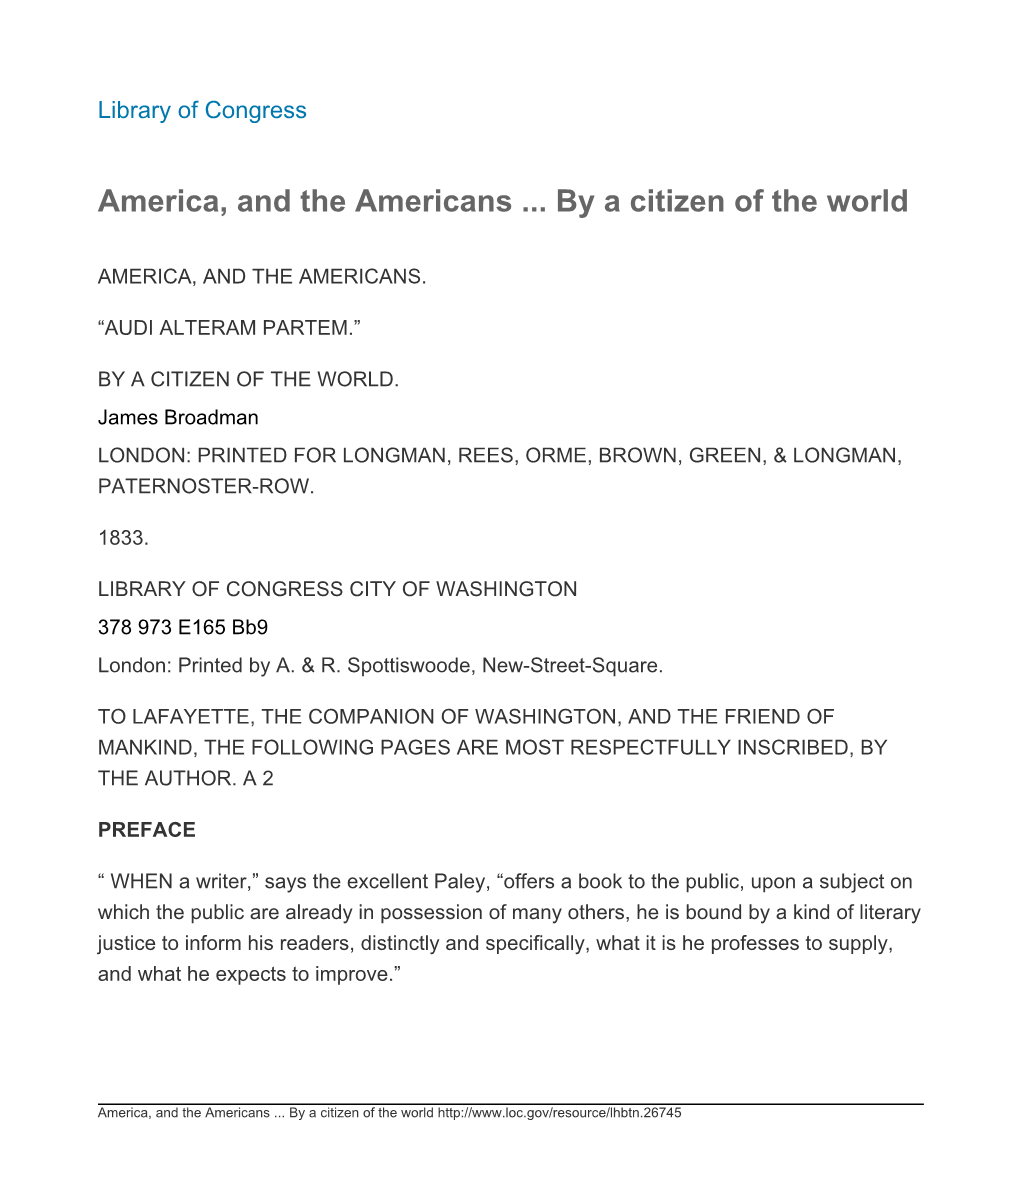 America, and the Americans ... by a Citizen of the World